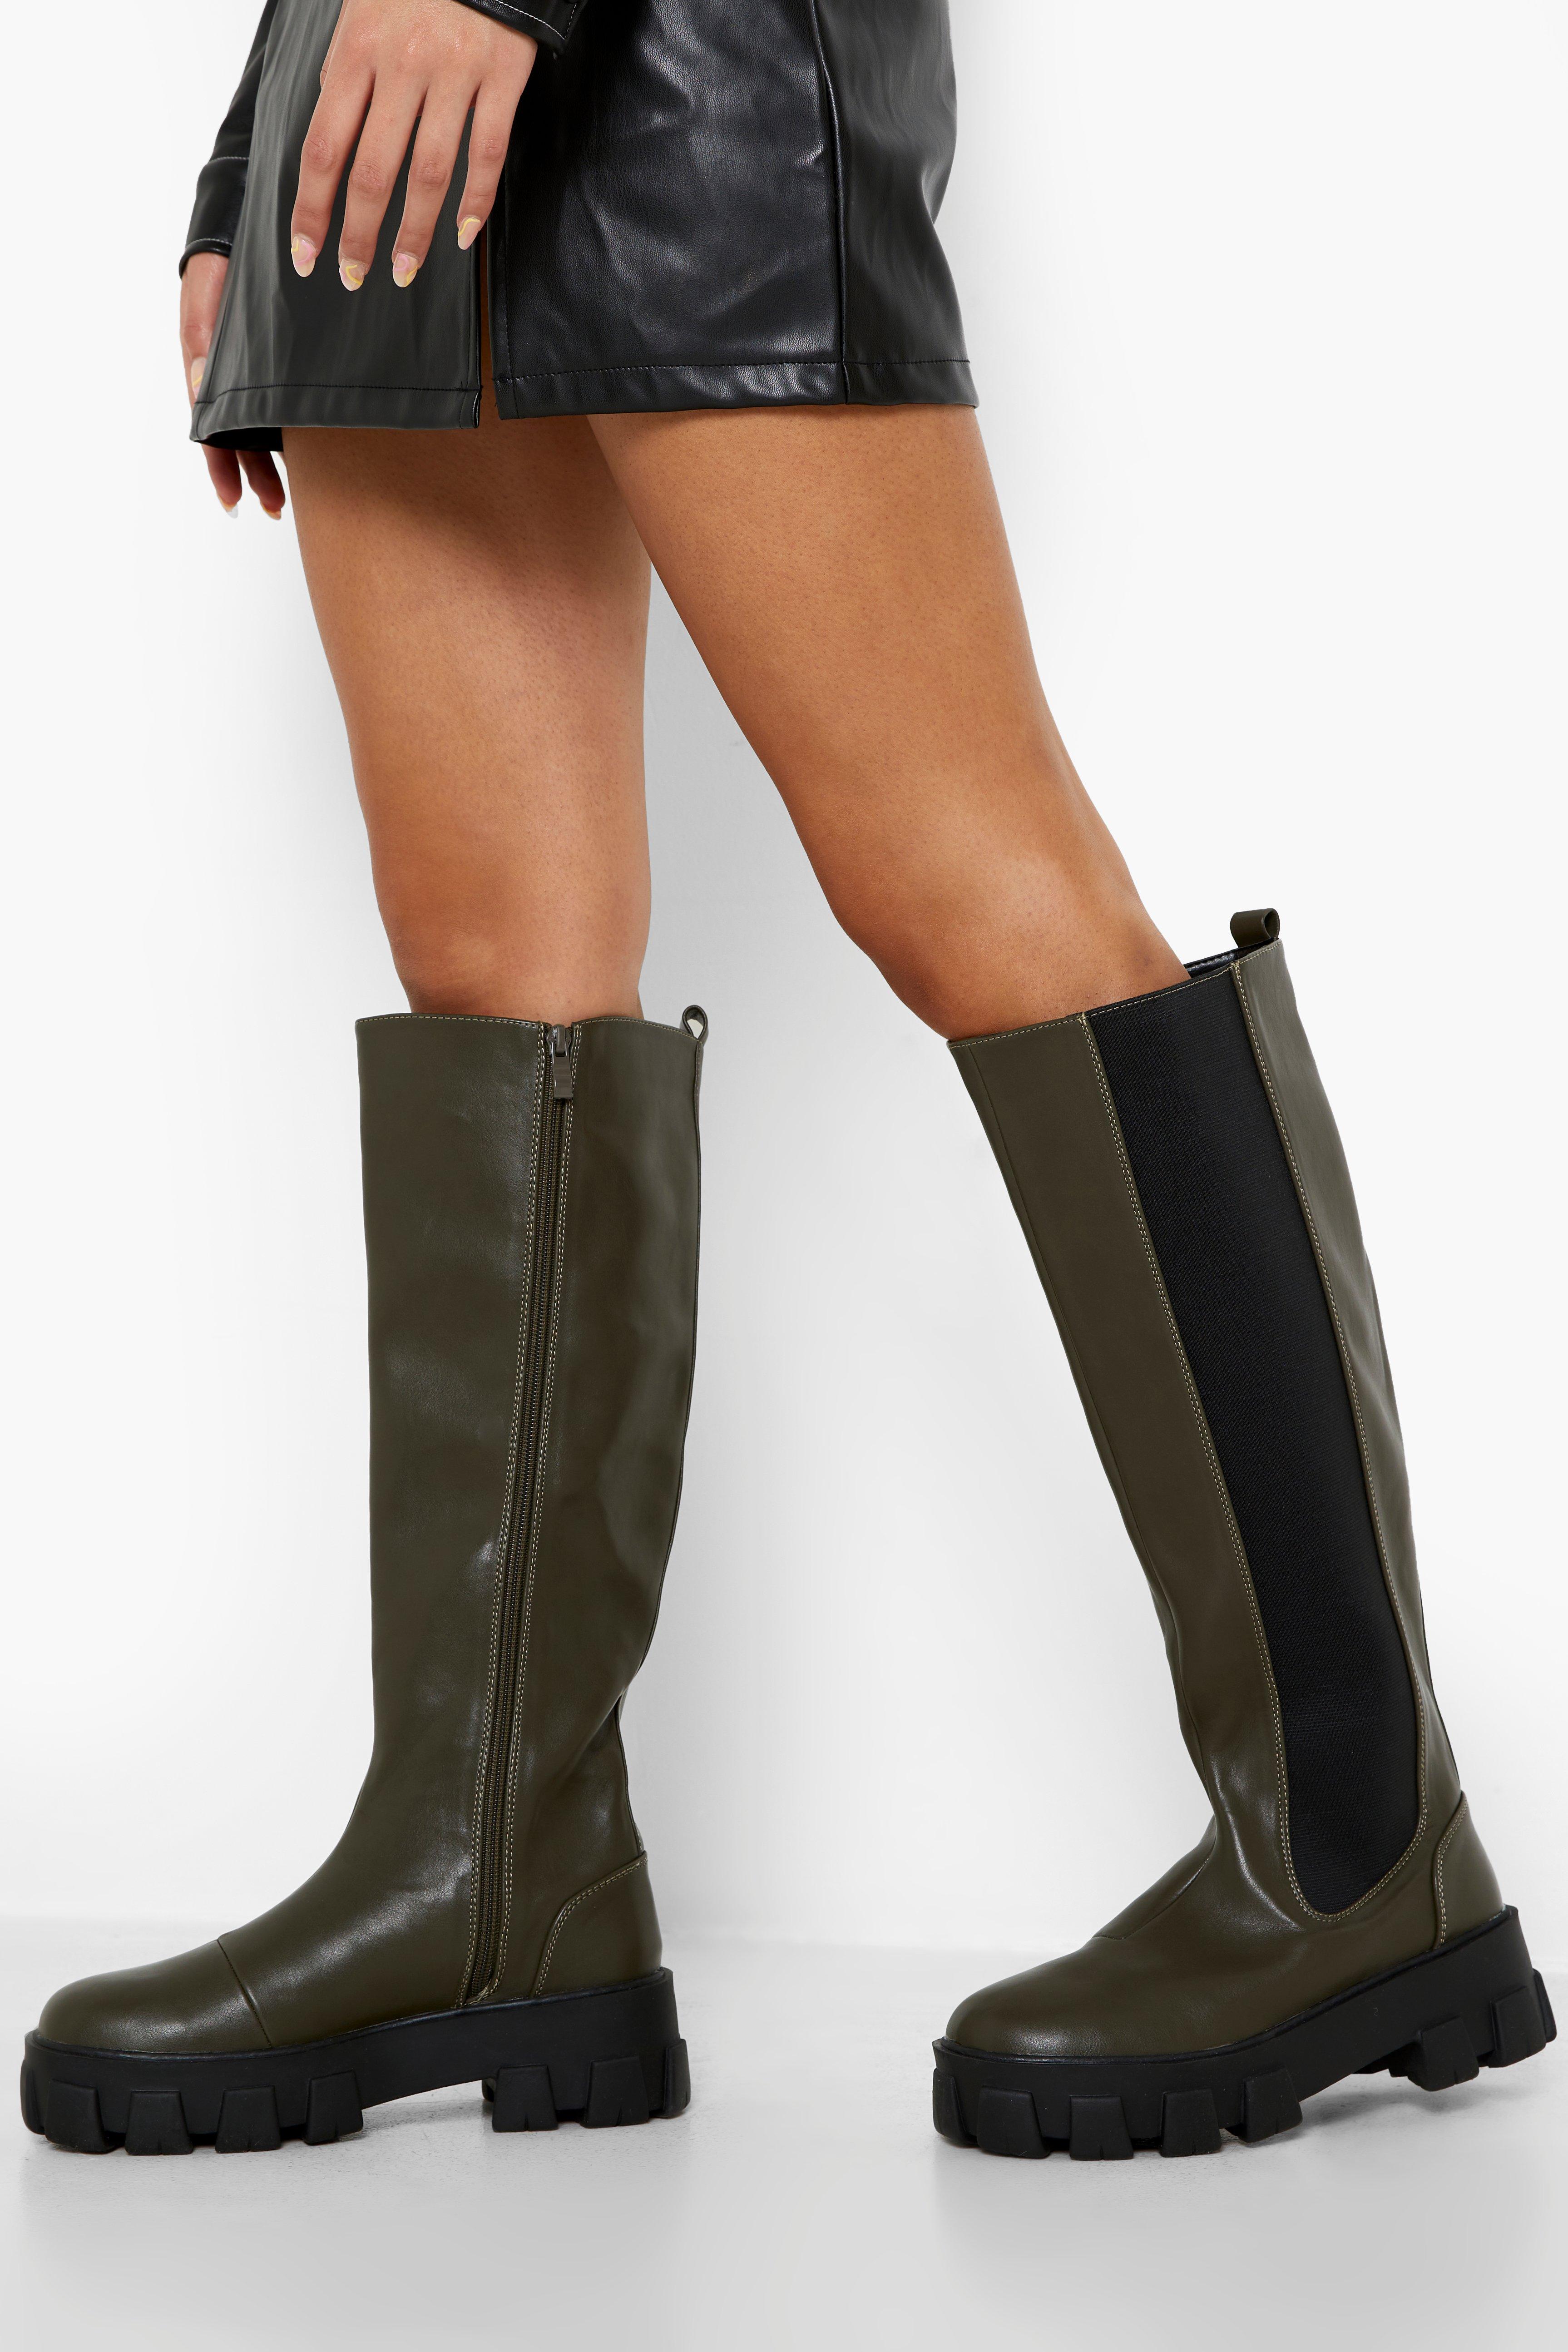 score Mos detail Over the Knee & Thigh High Boots | boohoo USA